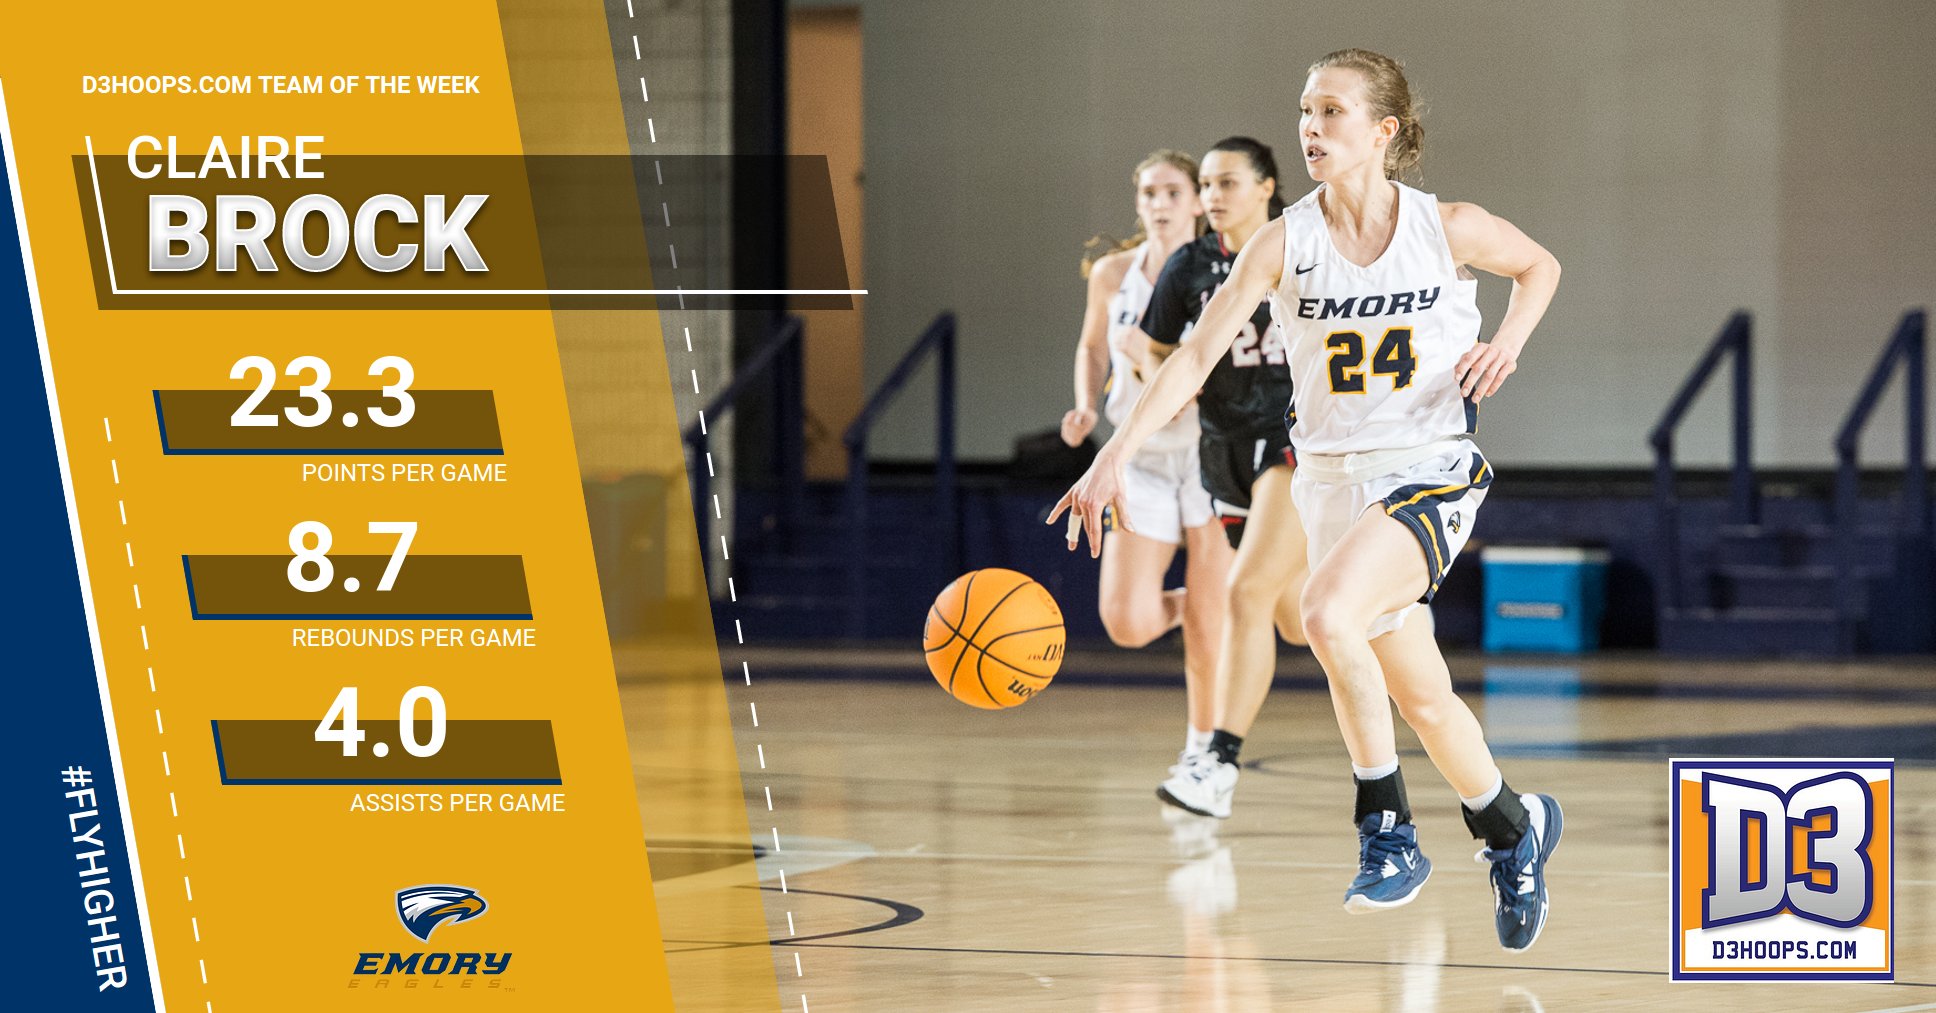 Claire Brock Named to D3hoops.com National Team of the Week